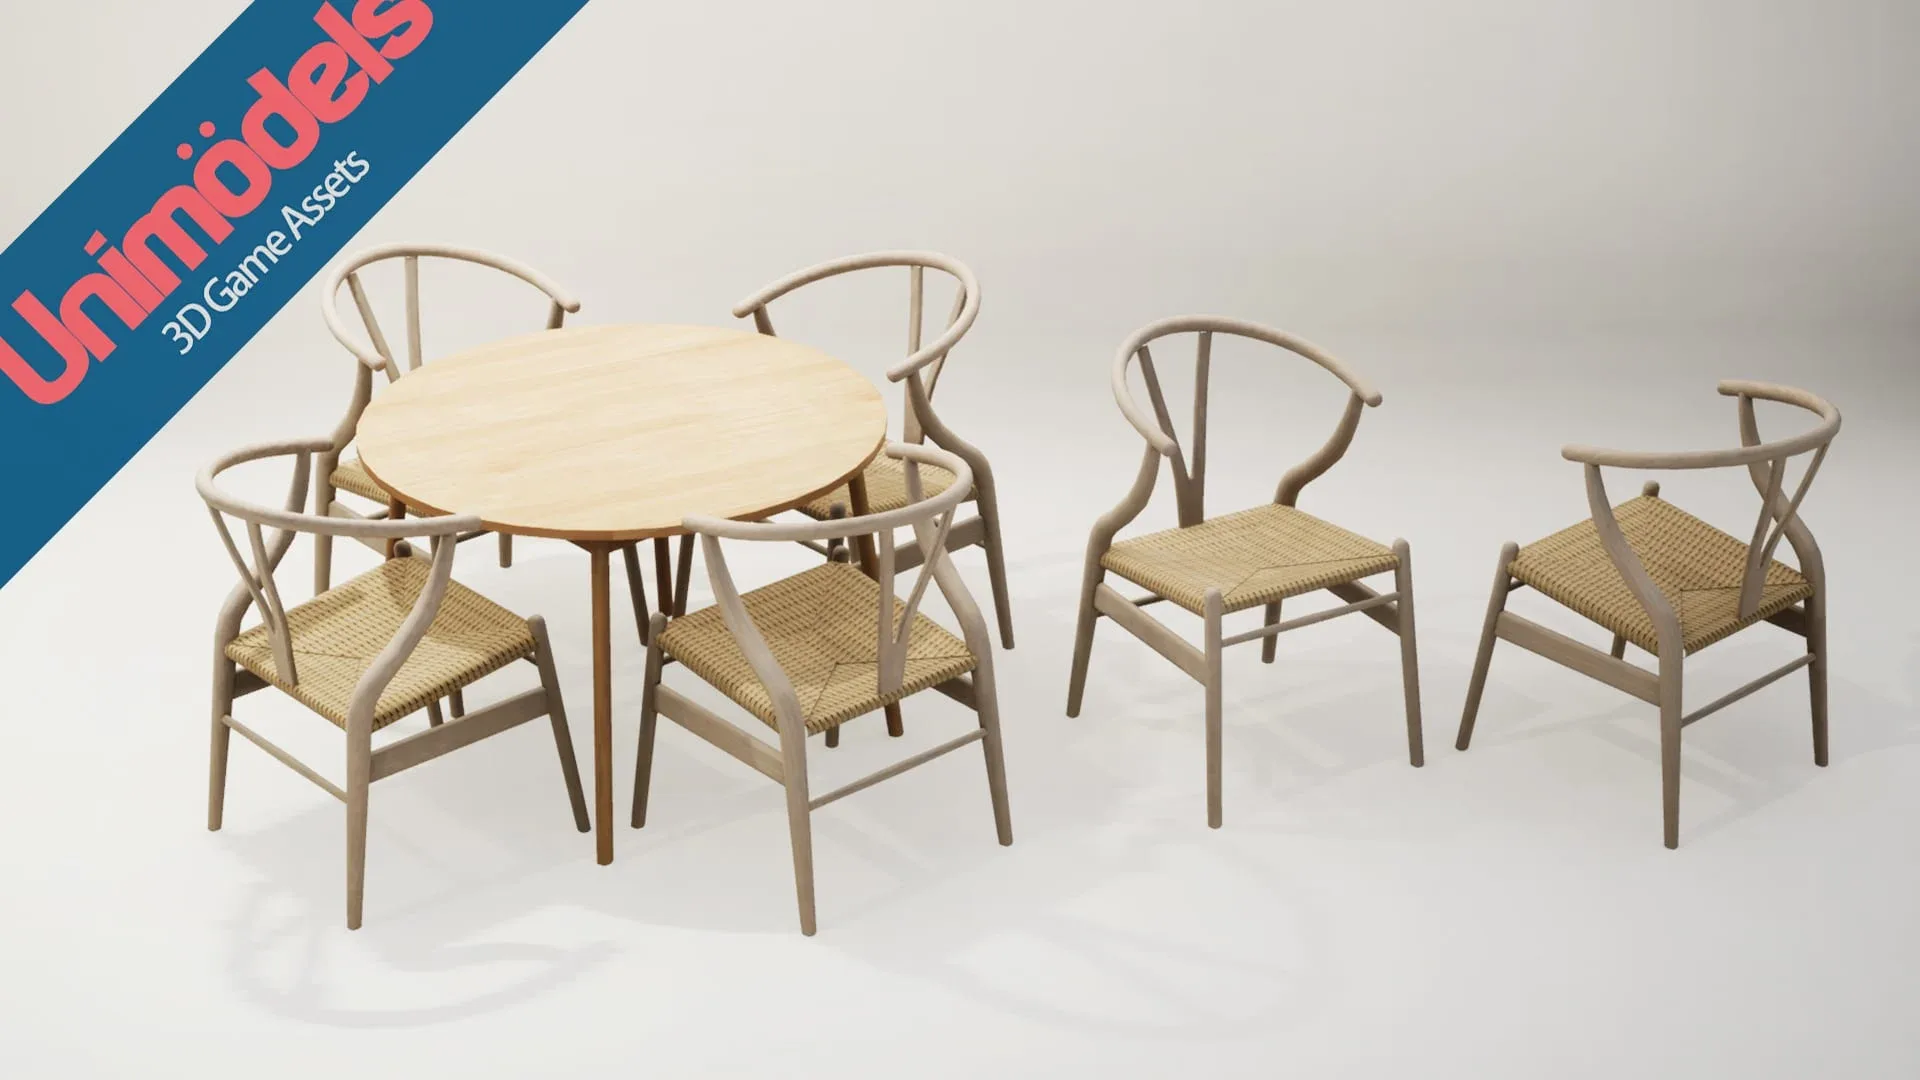 Unimodels Chairs & Tables Vol. 3 For Unity